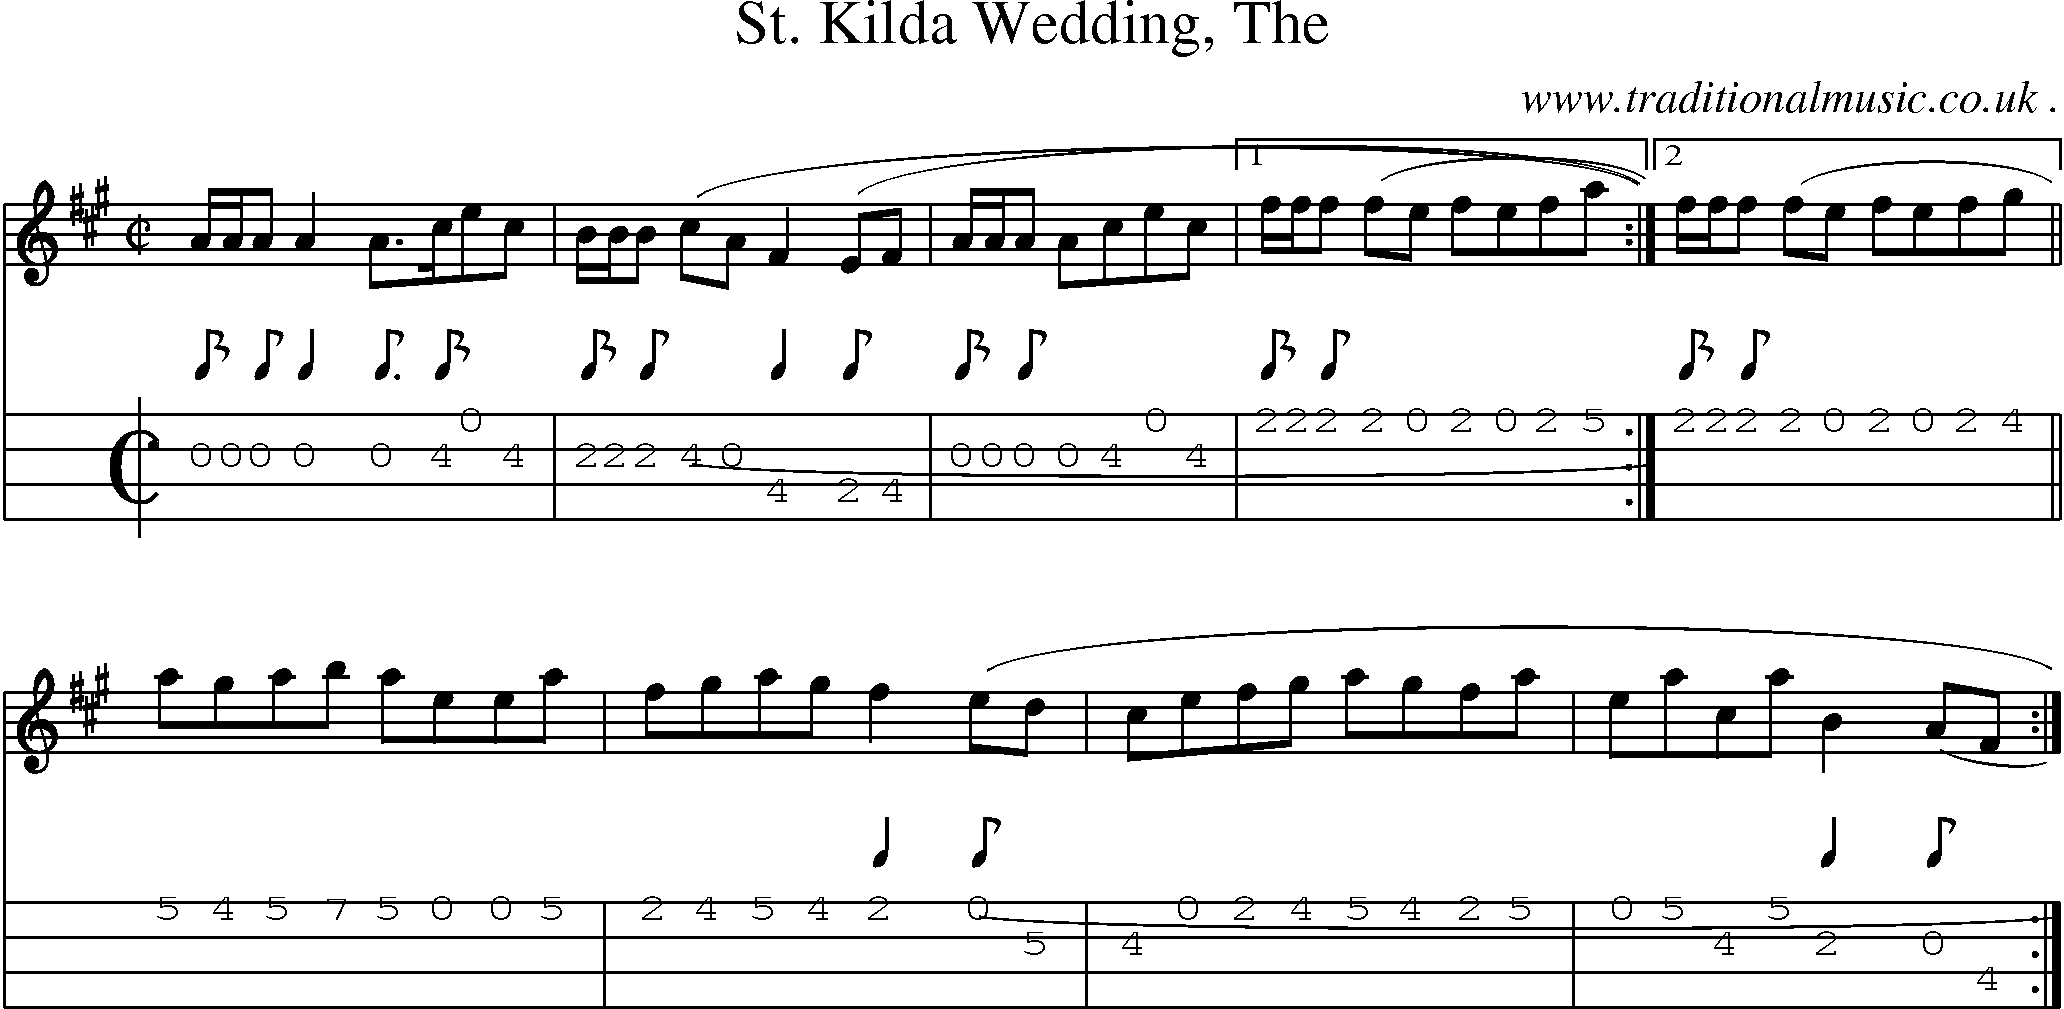 Sheet-music  score, Chords and Mandolin Tabs for St Kilda Wedding The